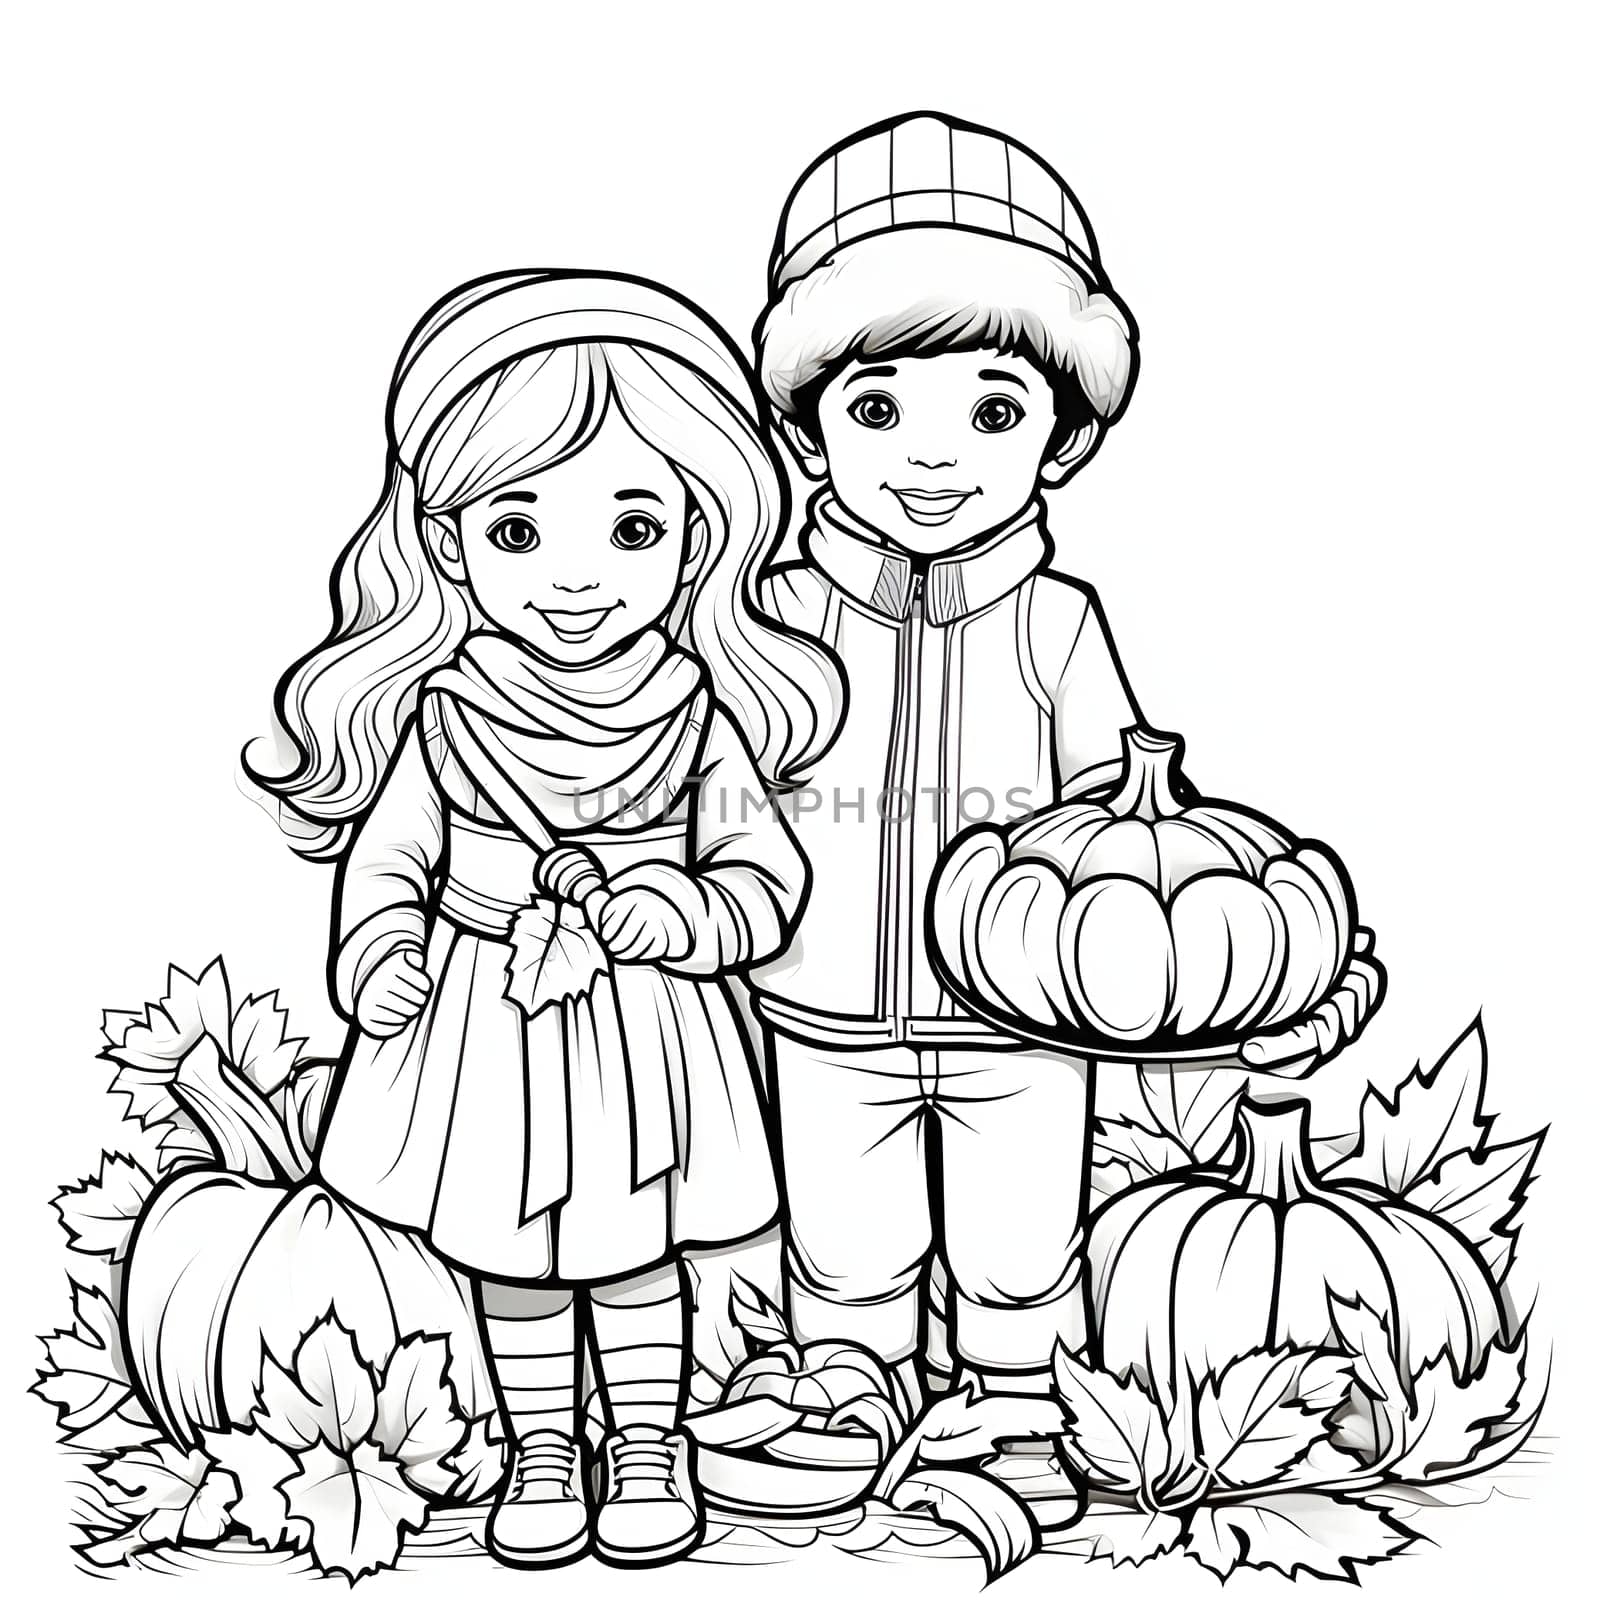 Black and White coloring book on it smiling children; boy and girl with pumpkins, leaves around. Pumpkin as a dish of thanksgiving for the harvest. by ThemesS